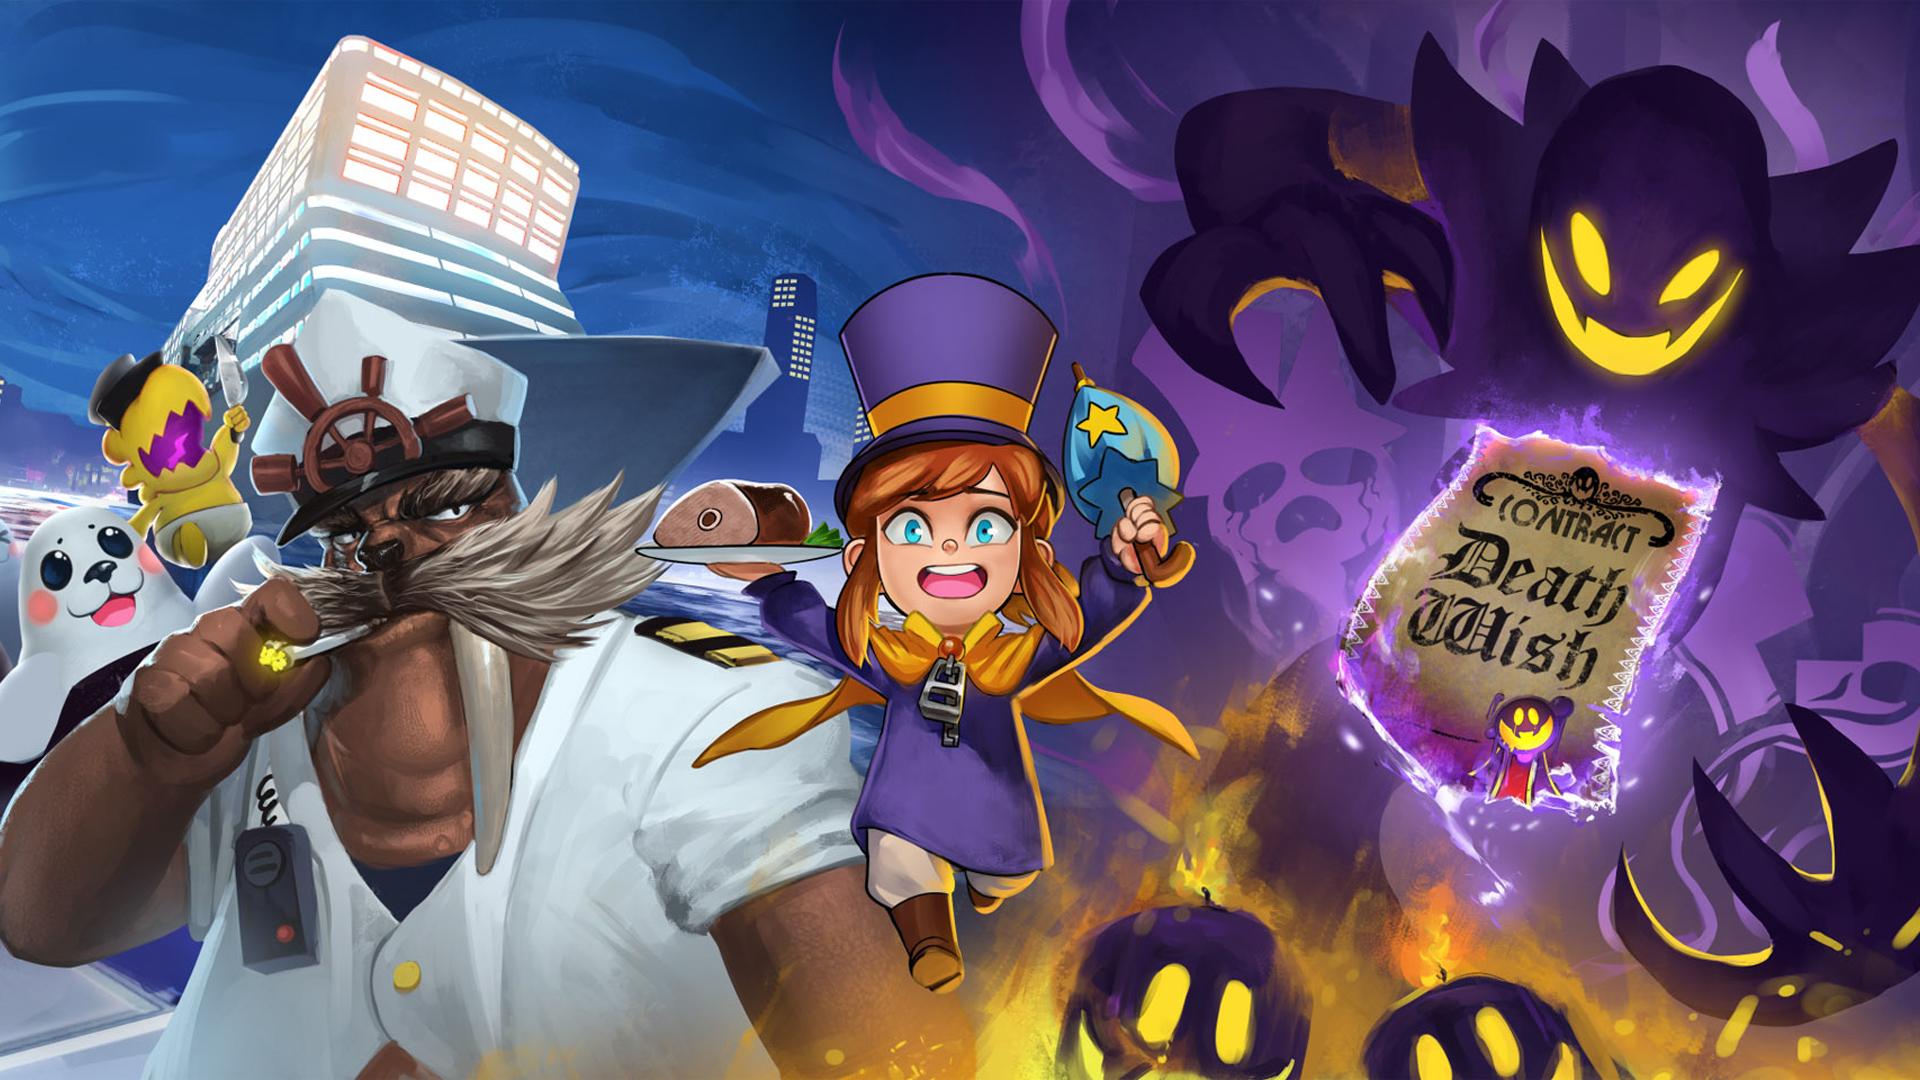 Game's heroes. Wallpaper from A Hat in Time